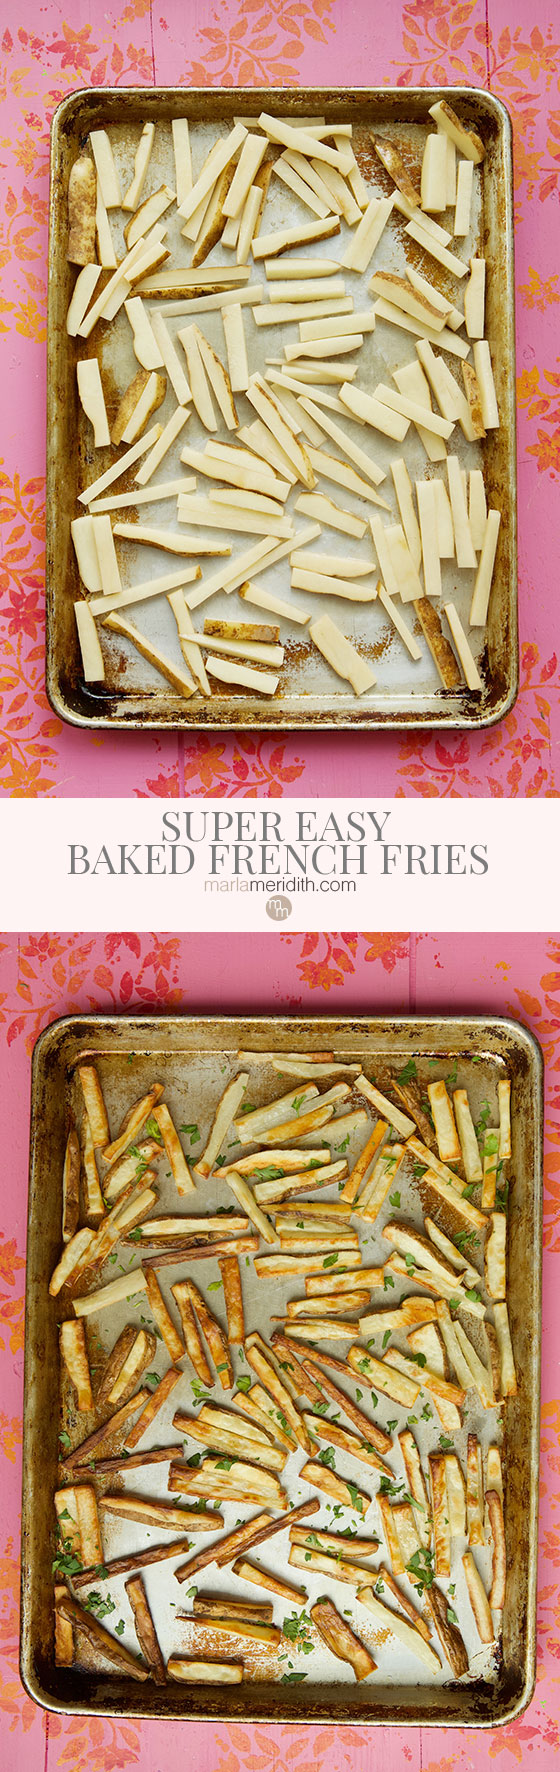 Quick, Easy & Crispy Baked French Fries recipe | MarlaMeridith.com